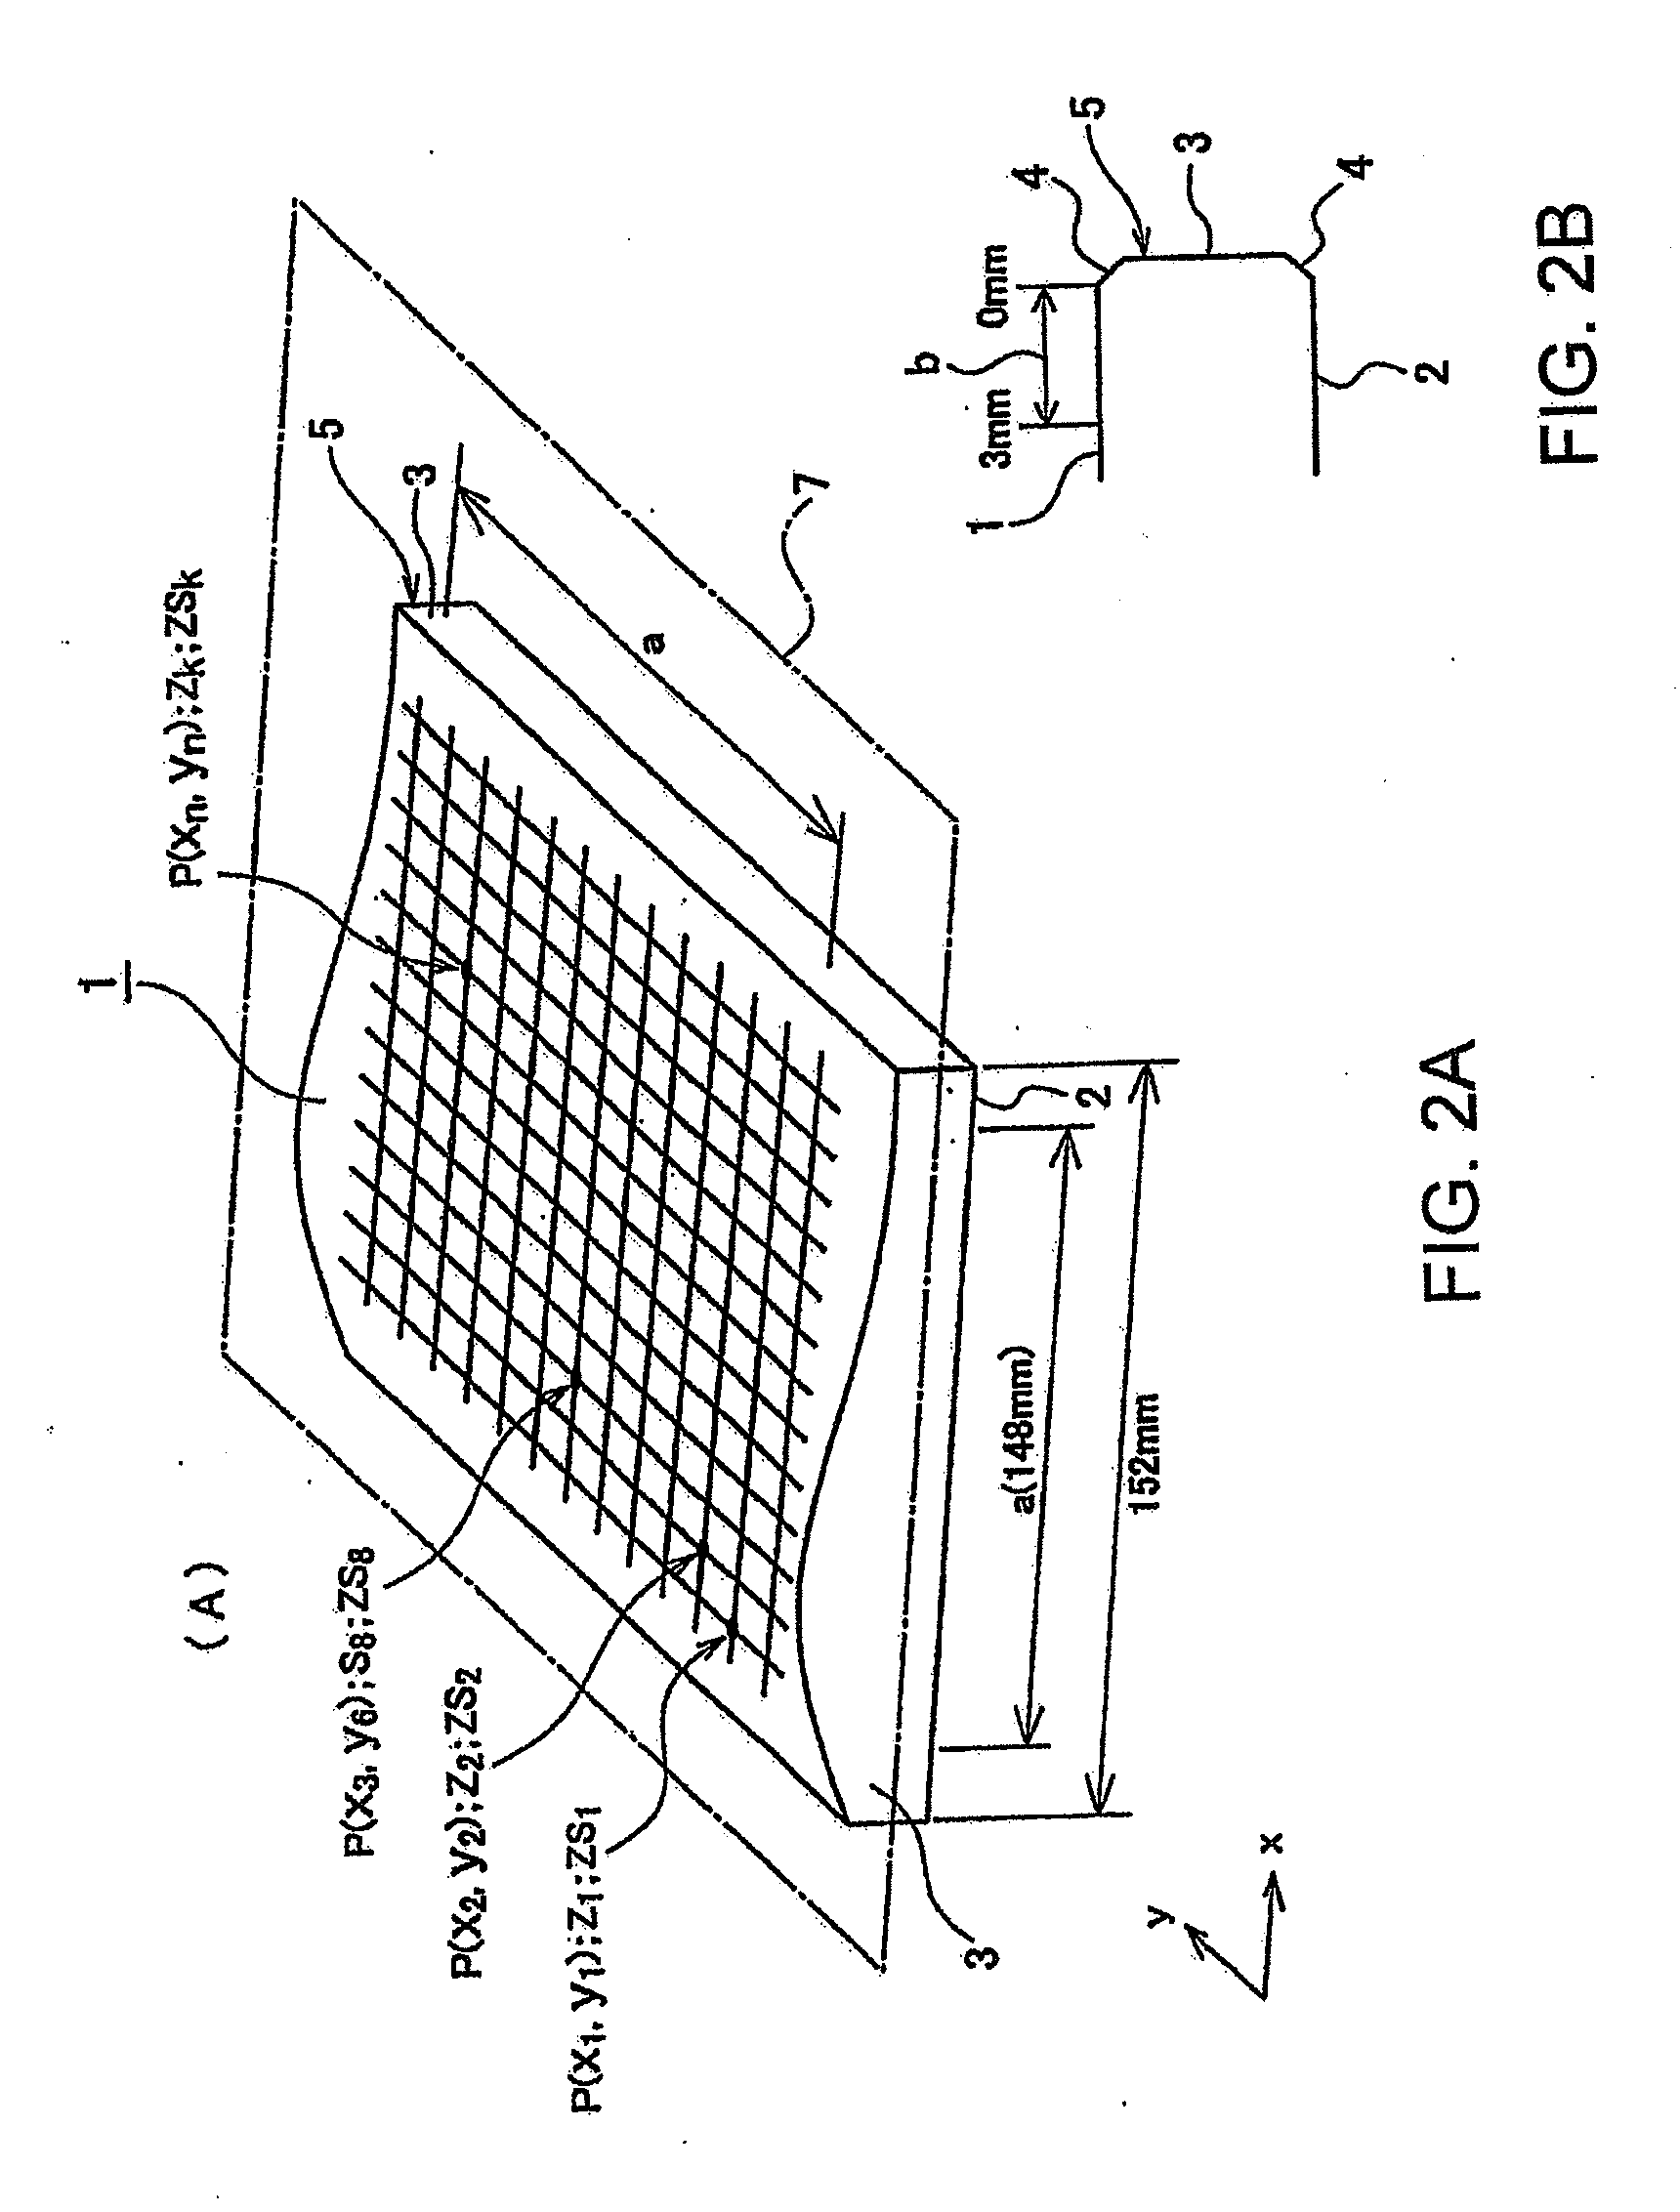 Mask blank transparent substrate manufacturing method, mask blank manufacturing method, and exposure mask manufacturing method